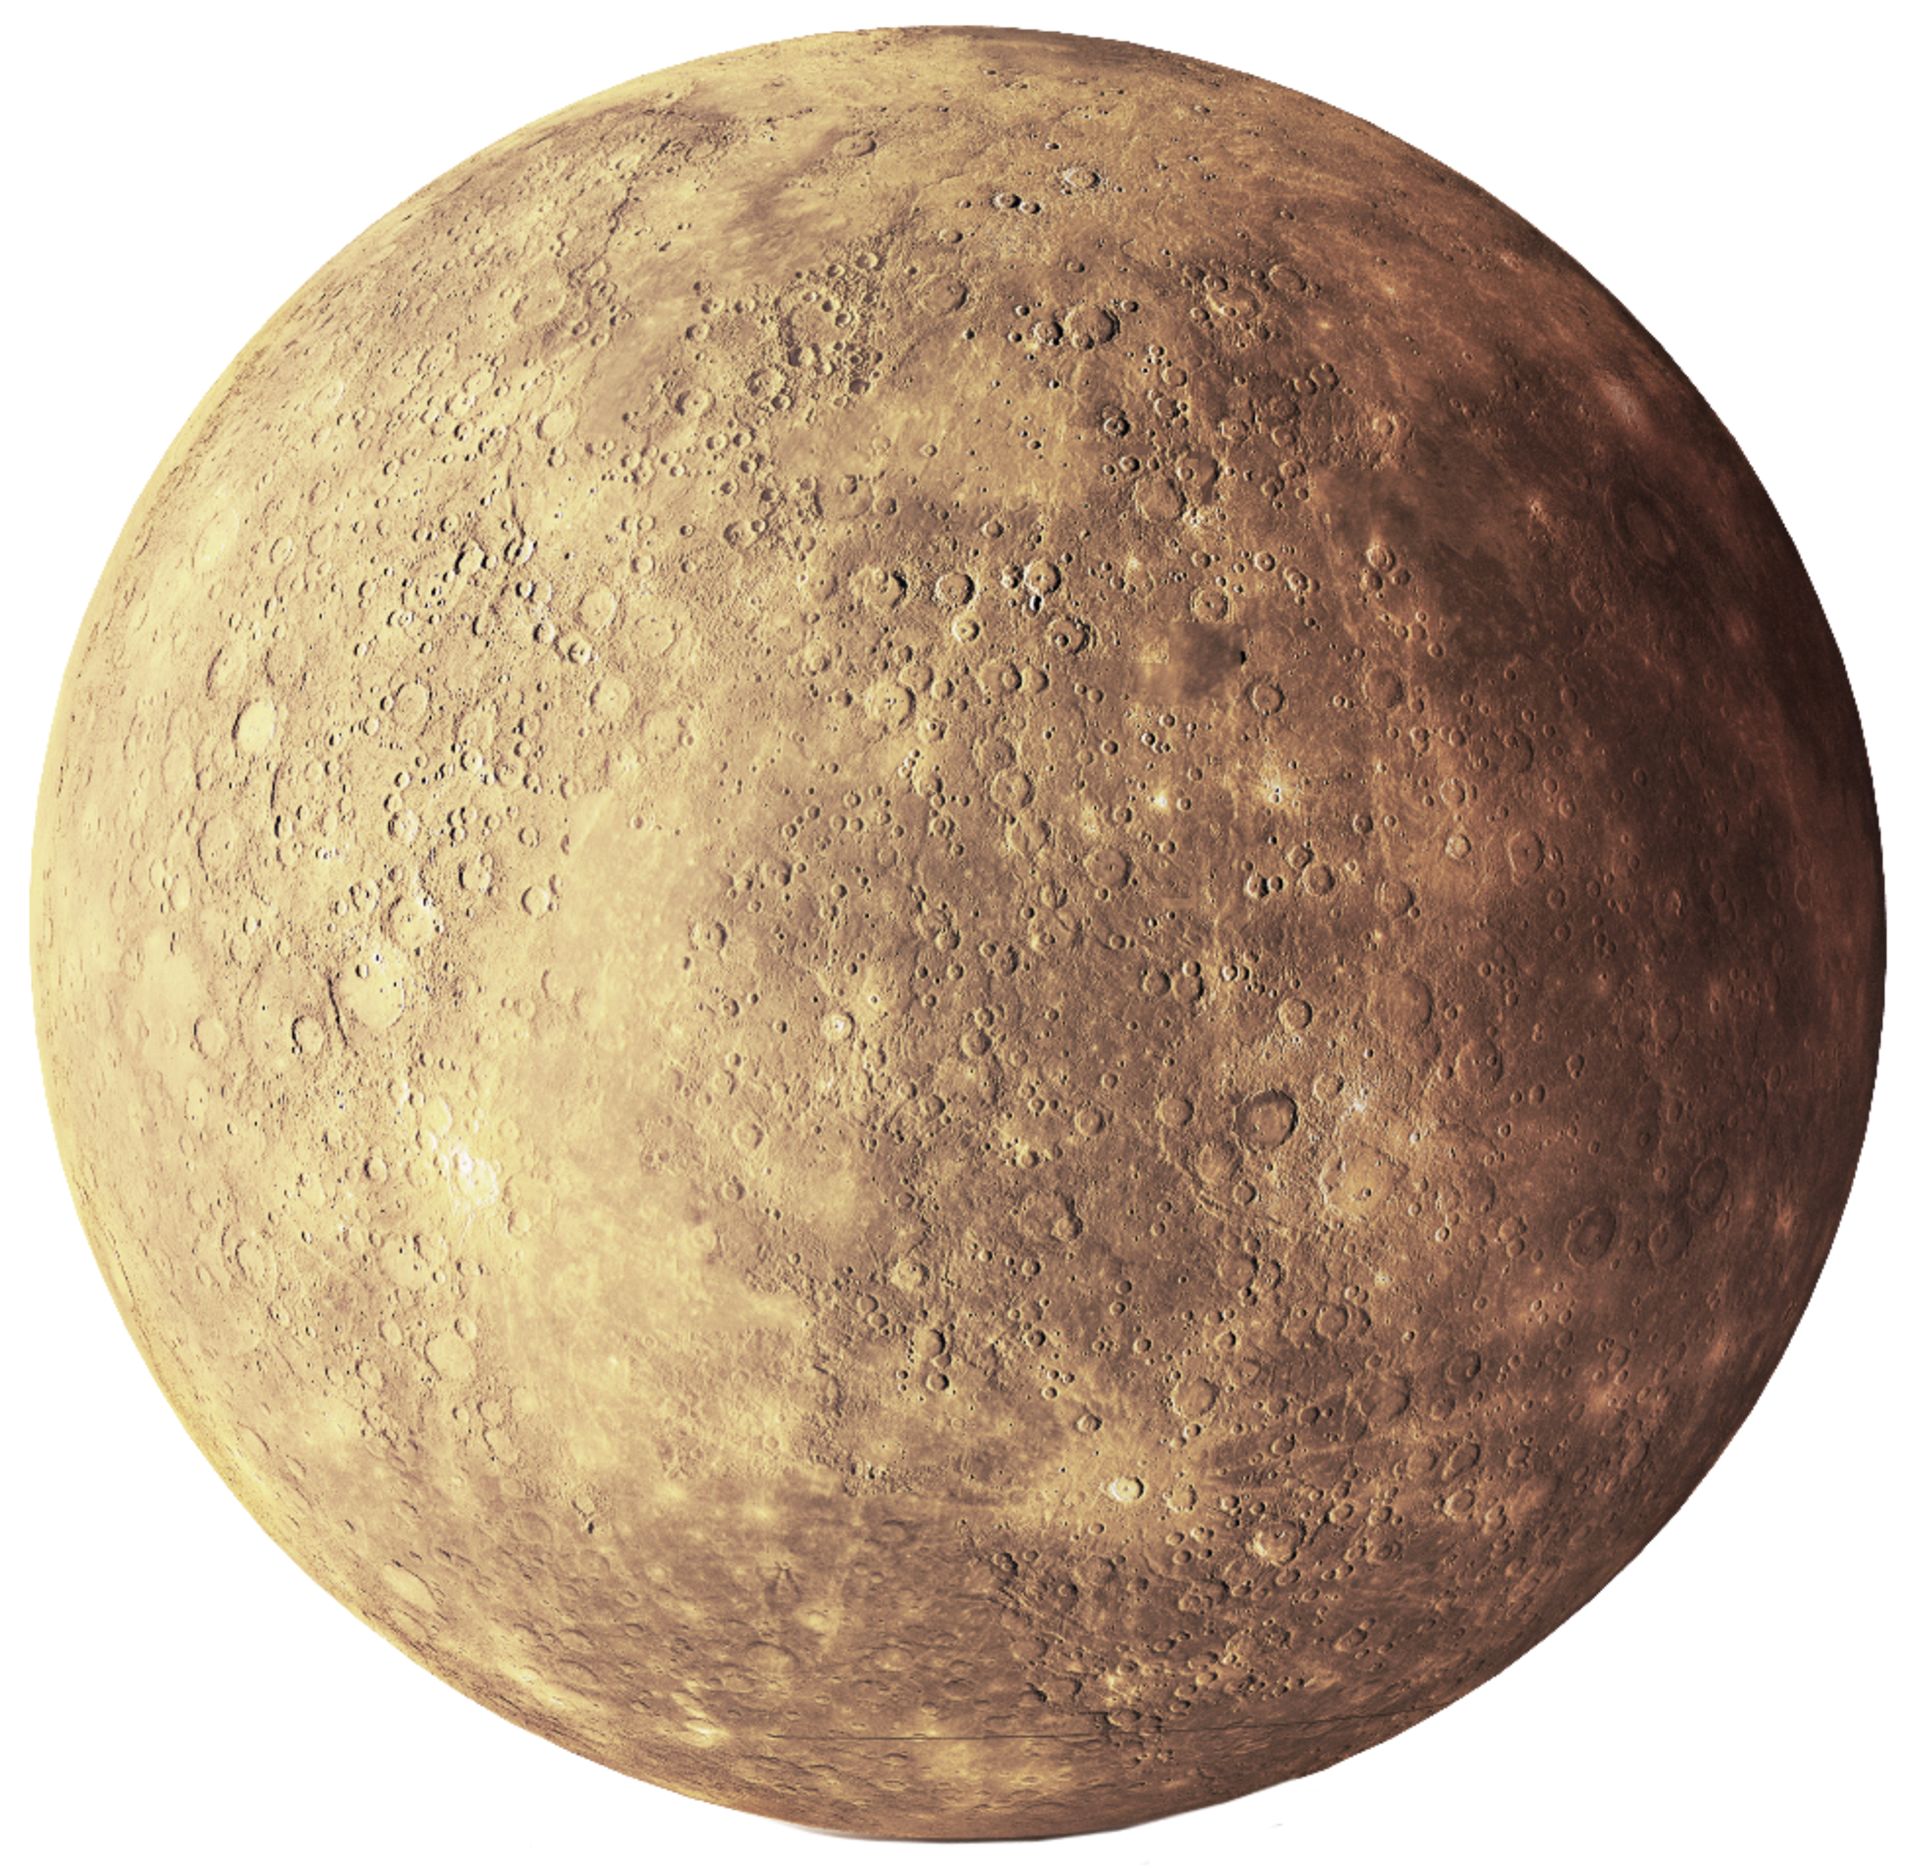 Planet Mercury | Mercury for Kids | DK Find Out